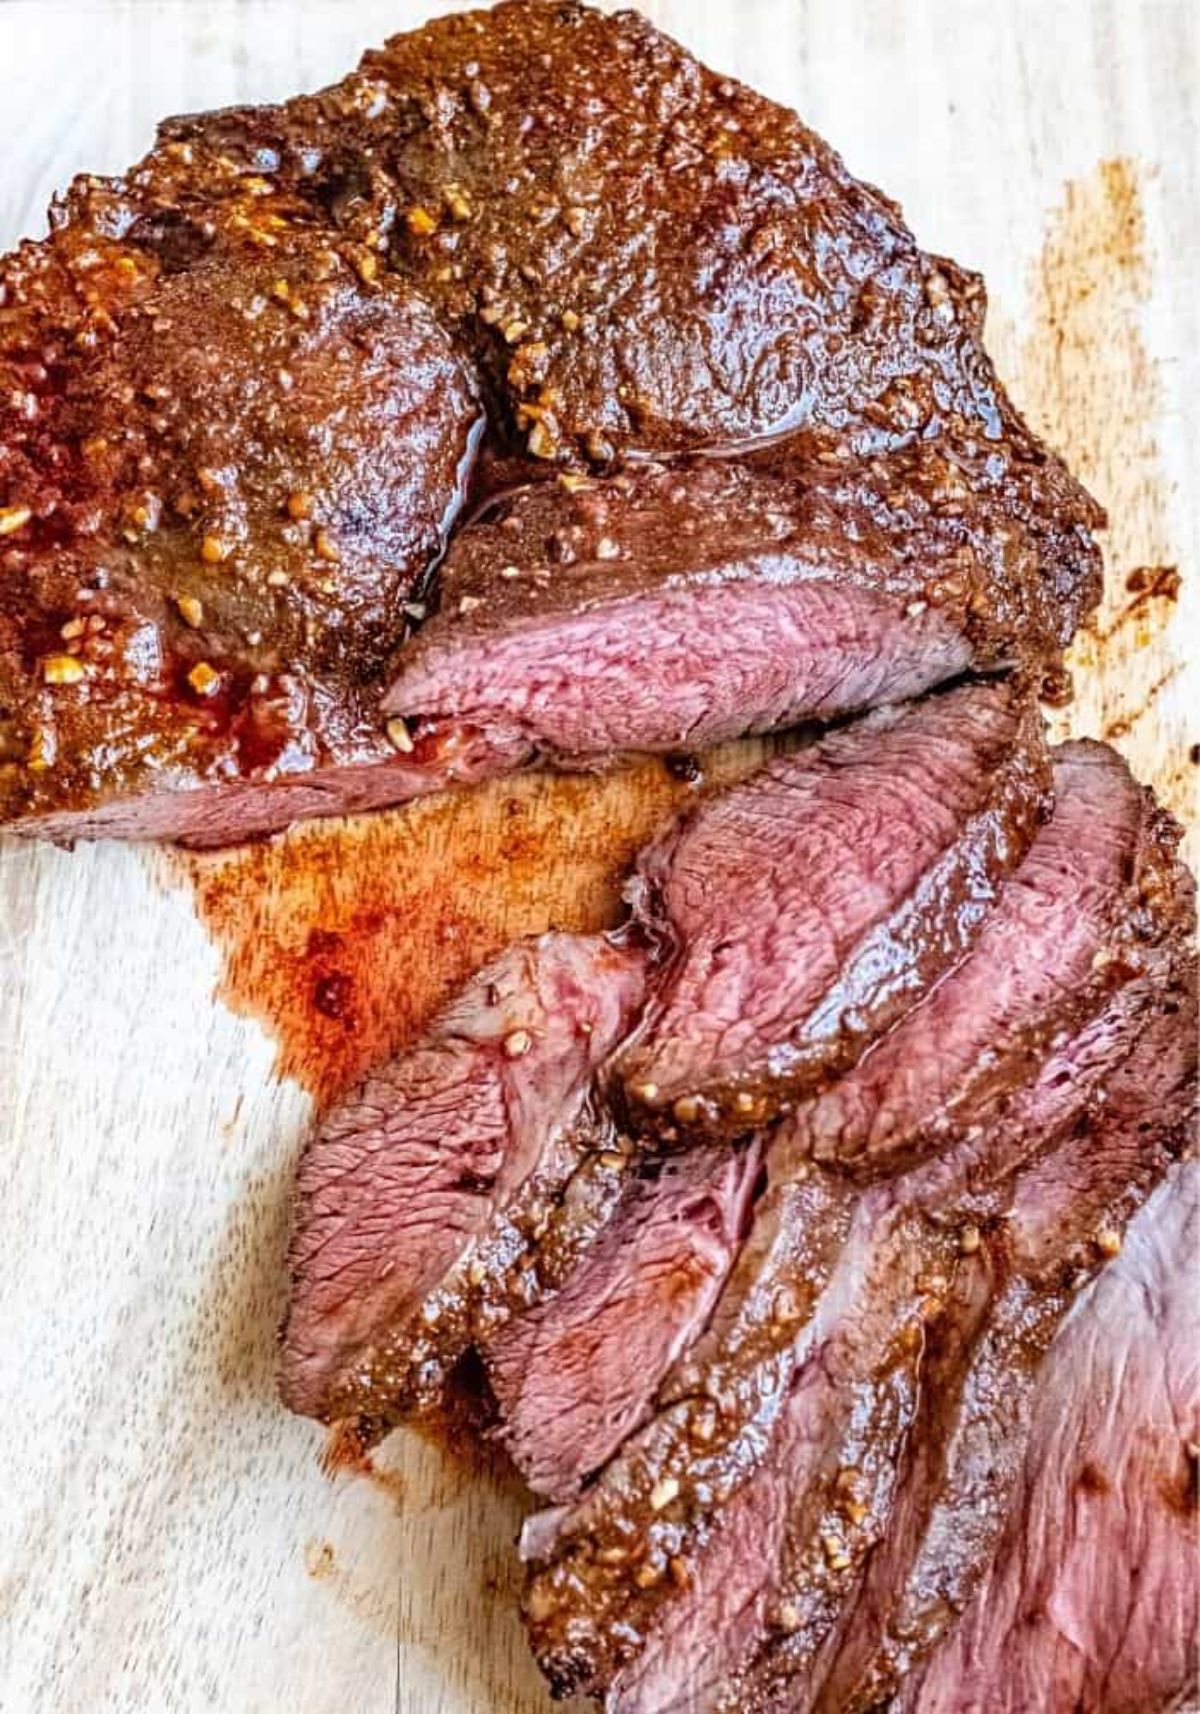 Juicy partially sliced the best sirloin roast on a wooden cutting board.